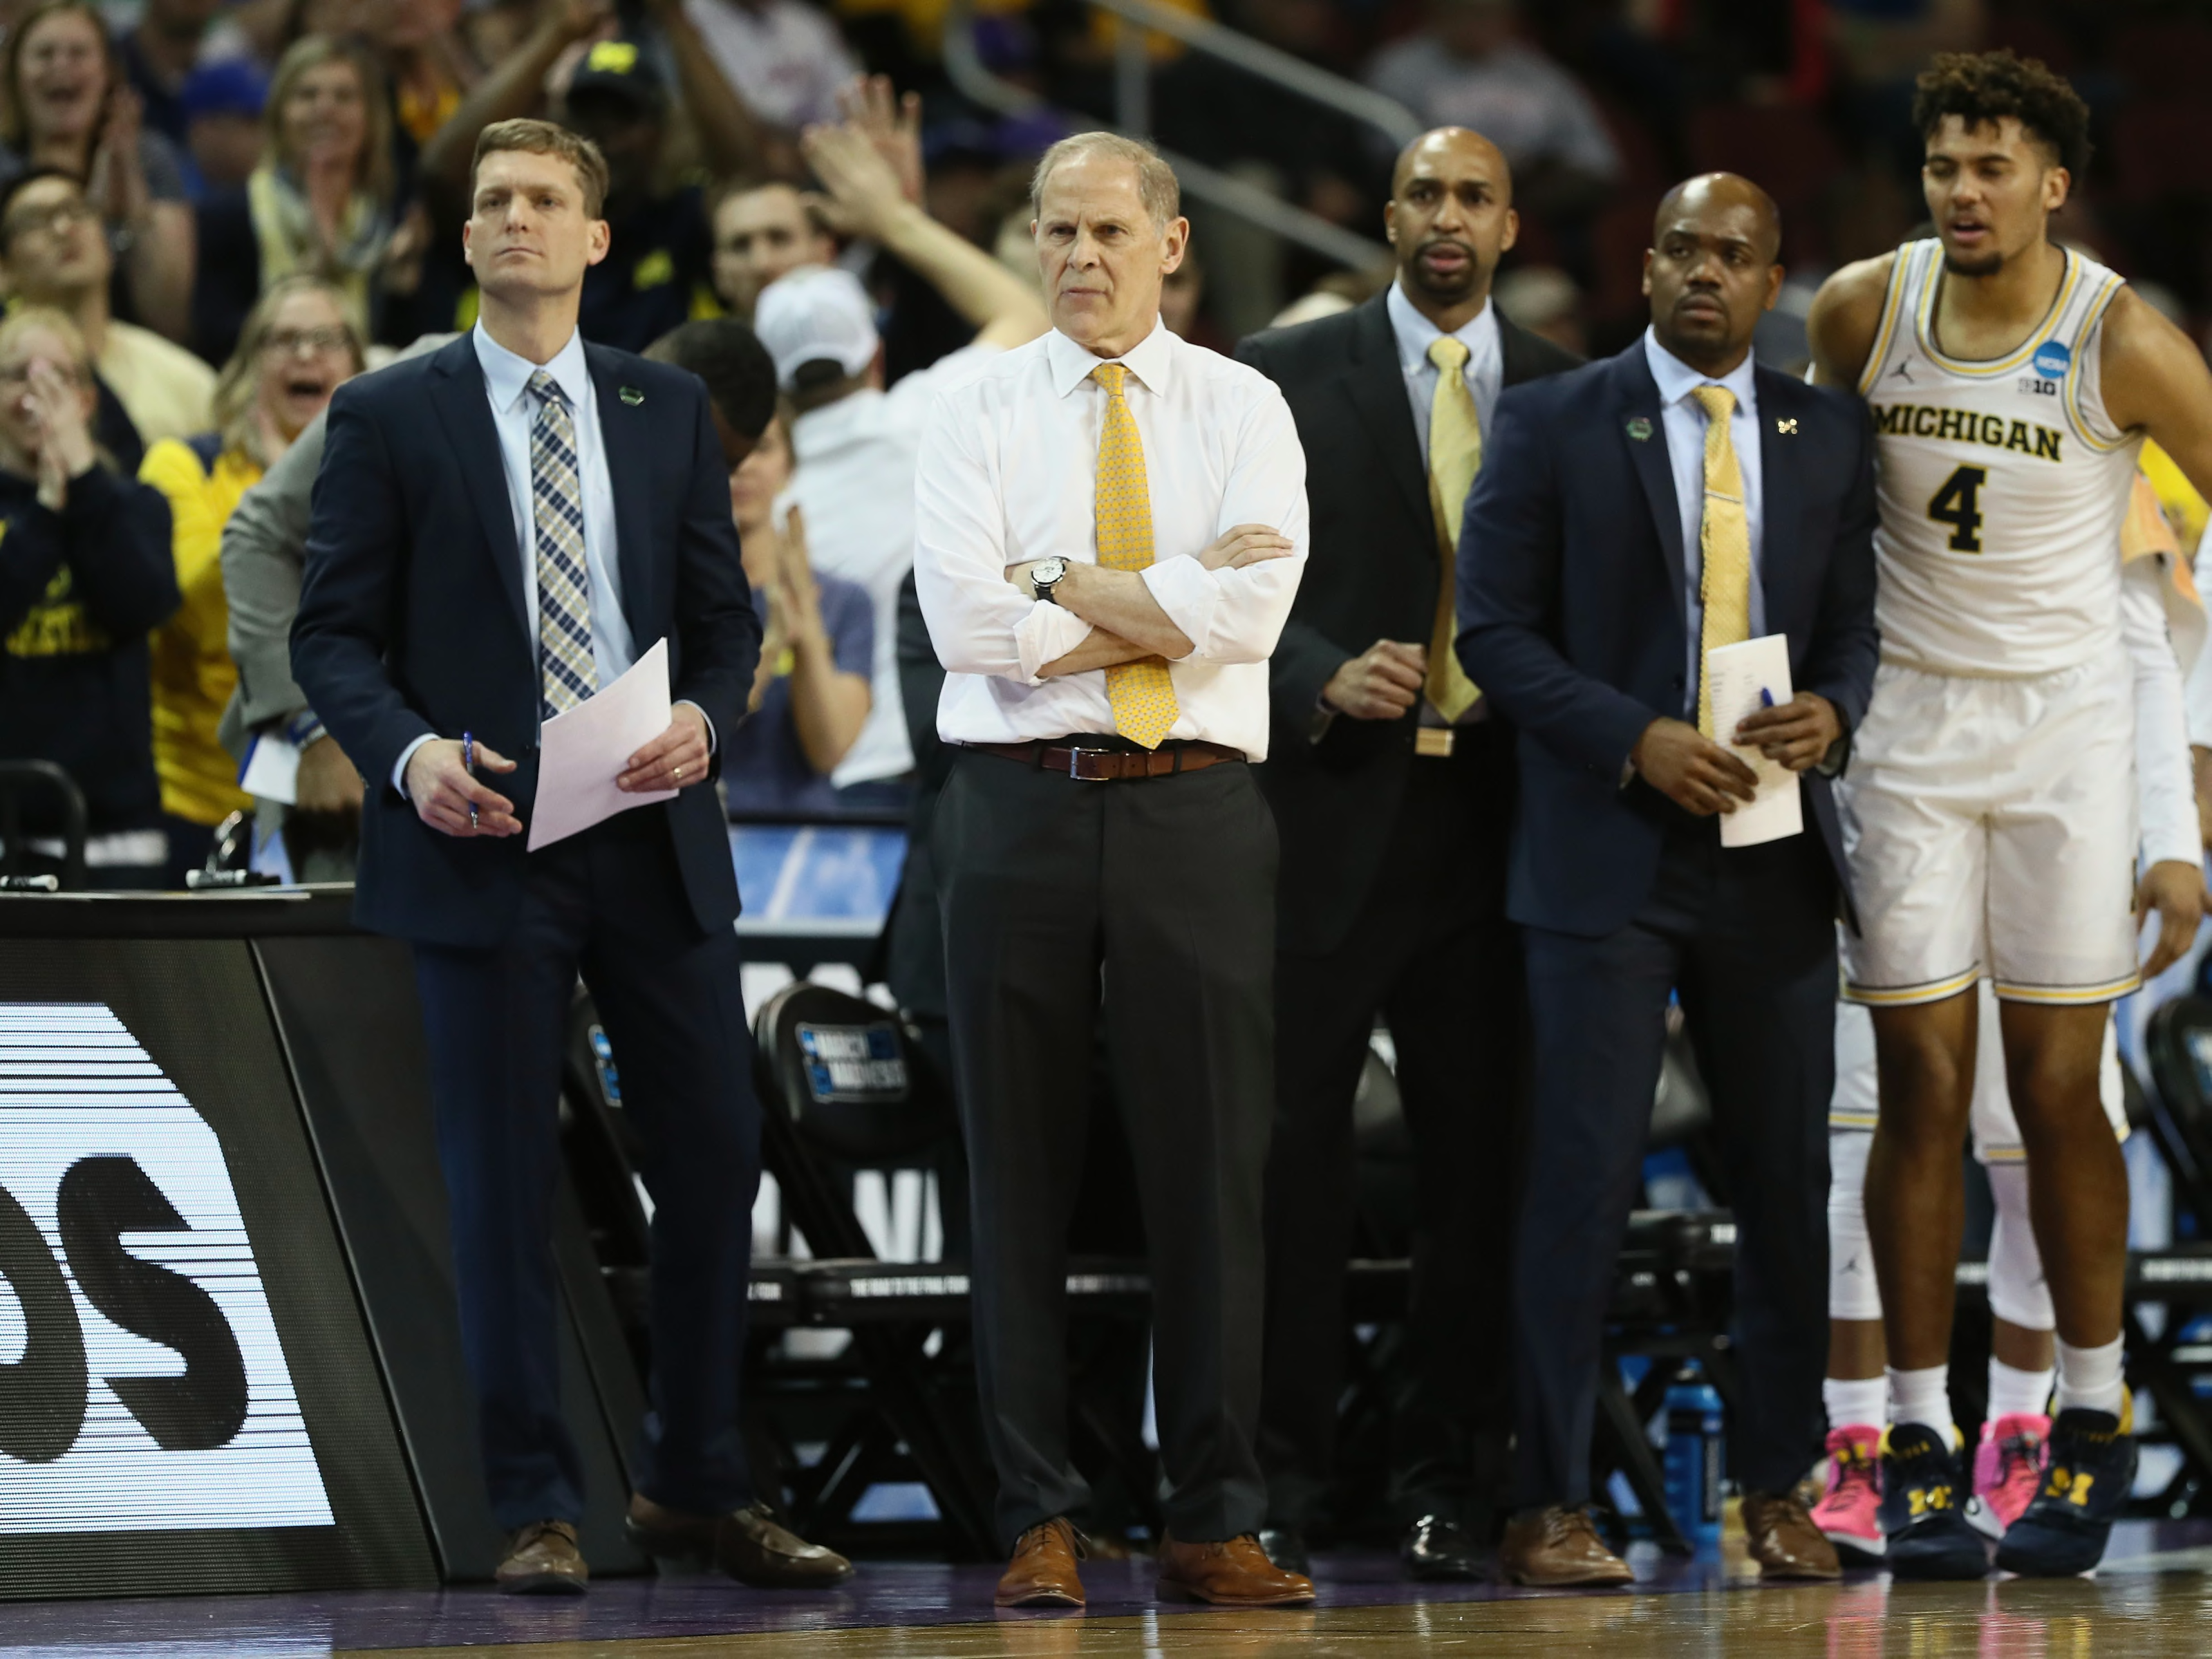 NCAA Basketball 10 college assistants poised to head coaches